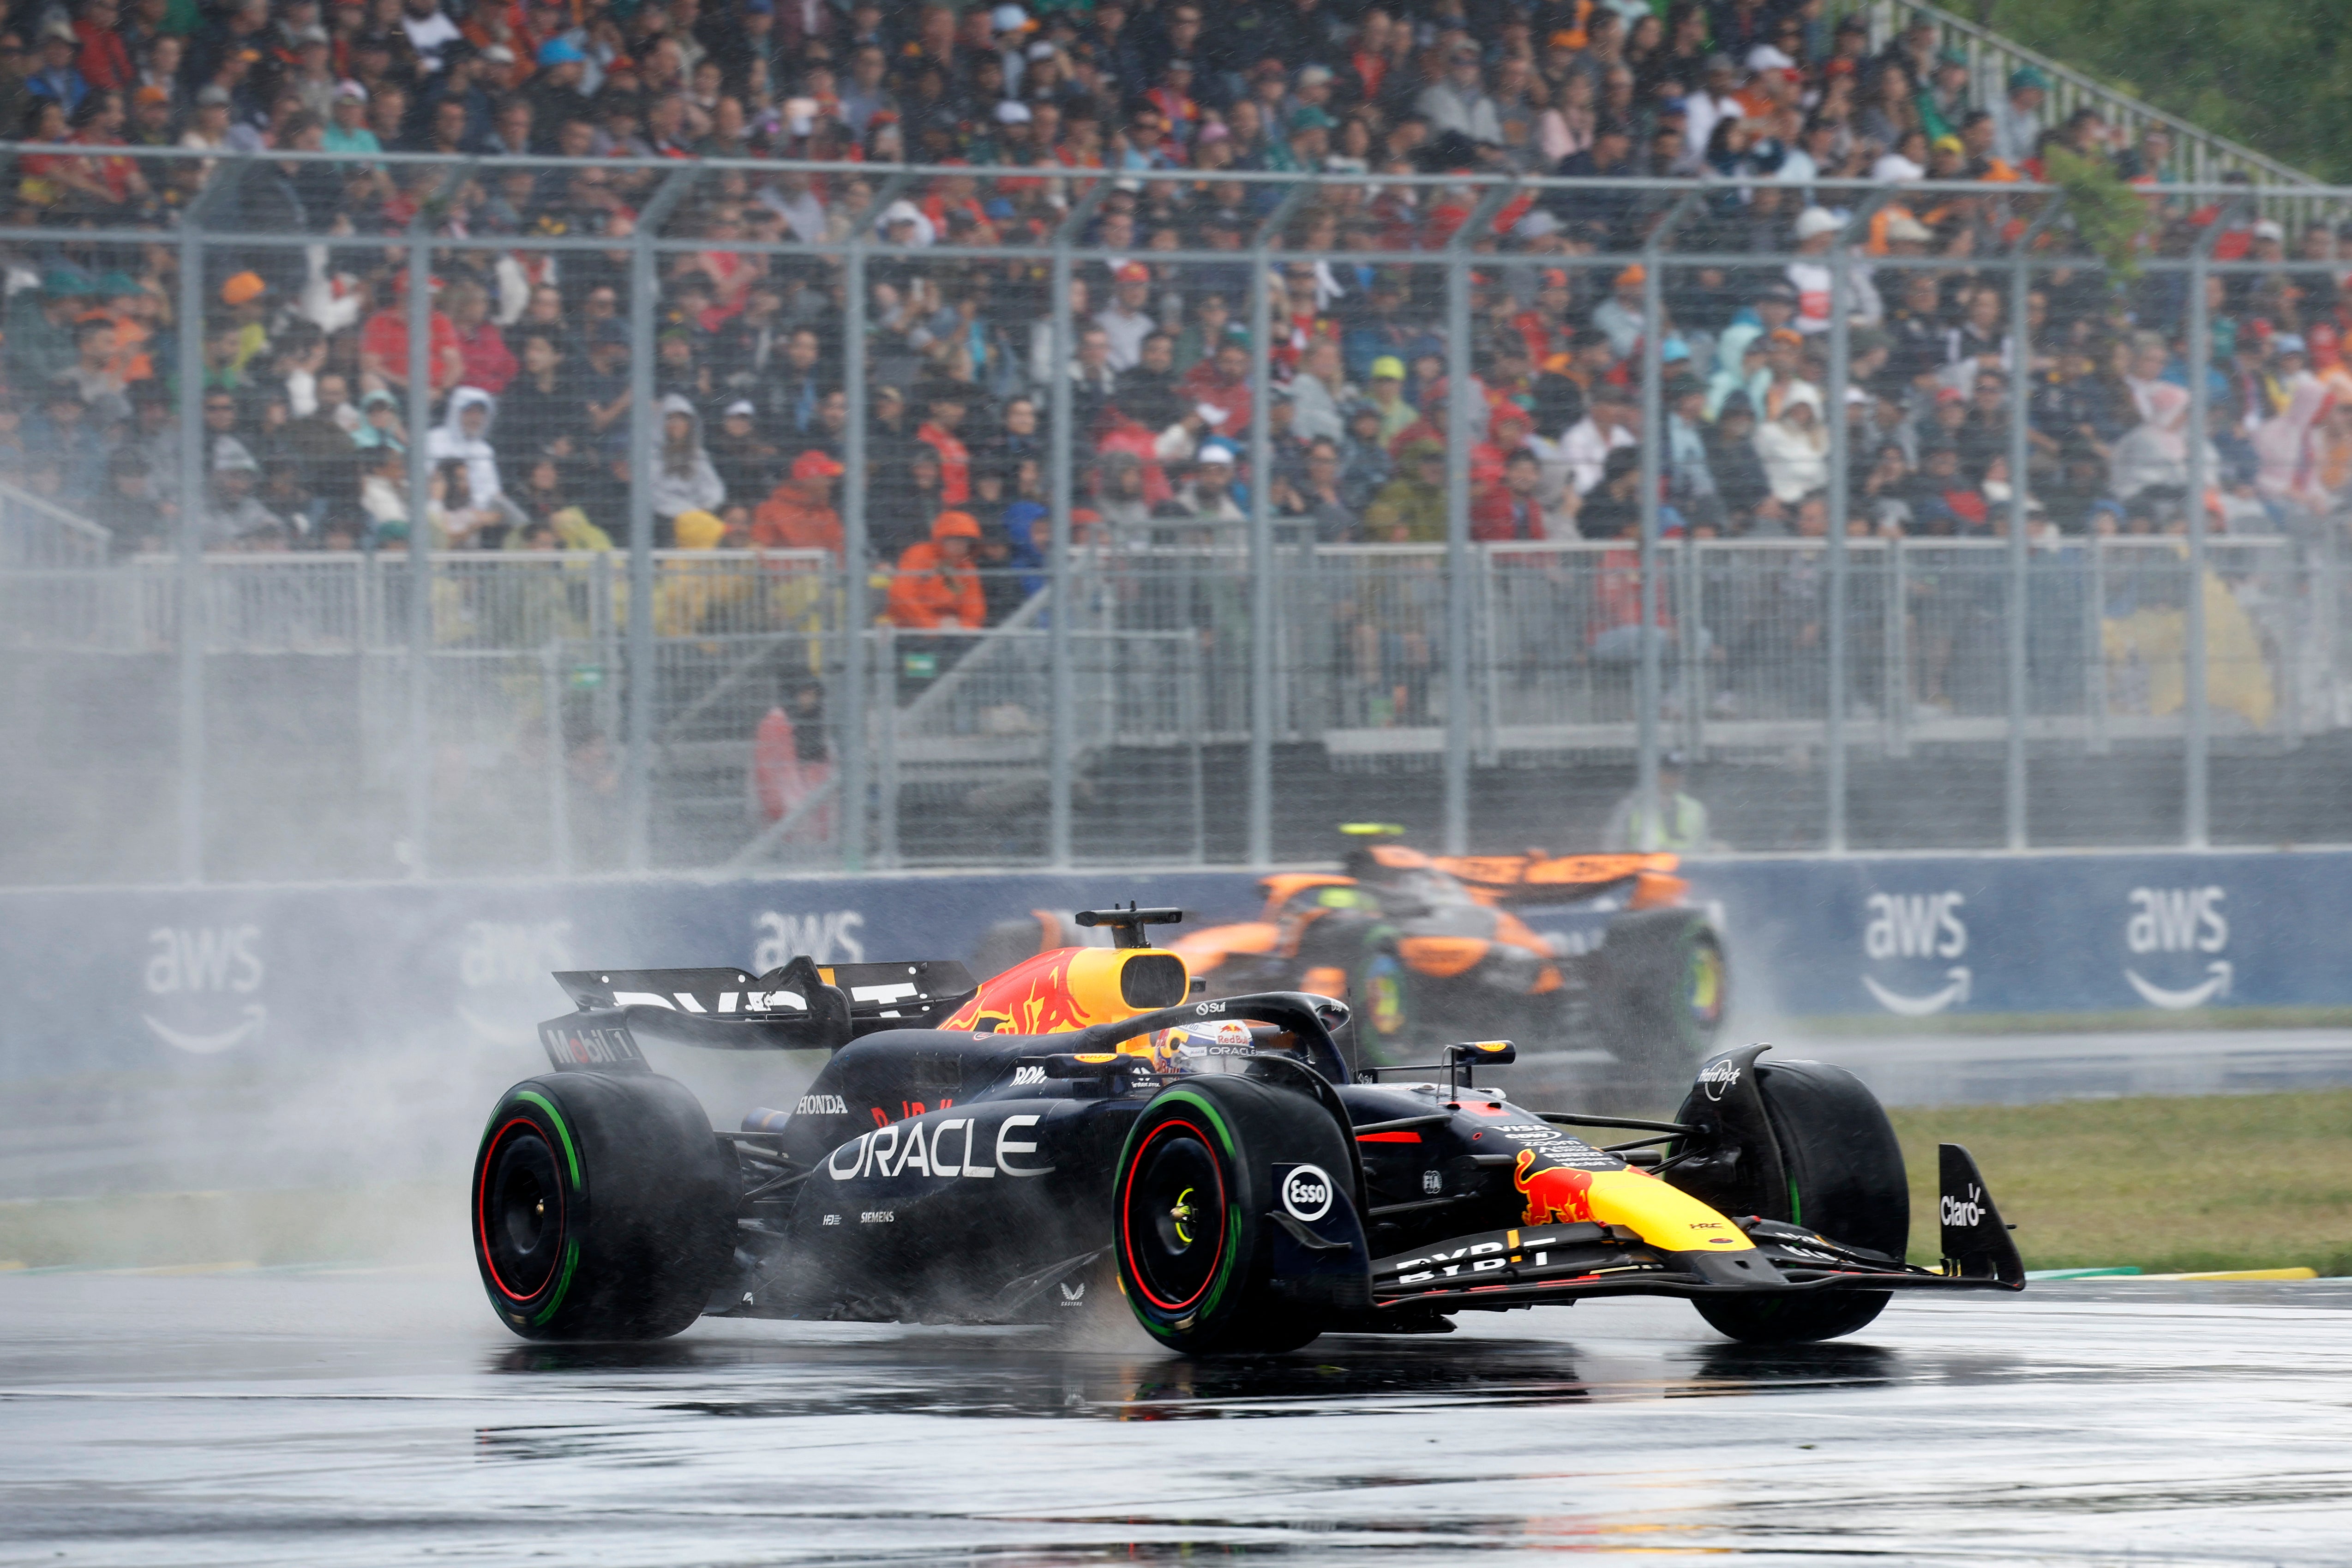 Max Verstappen claimed the win in the rain in Canada